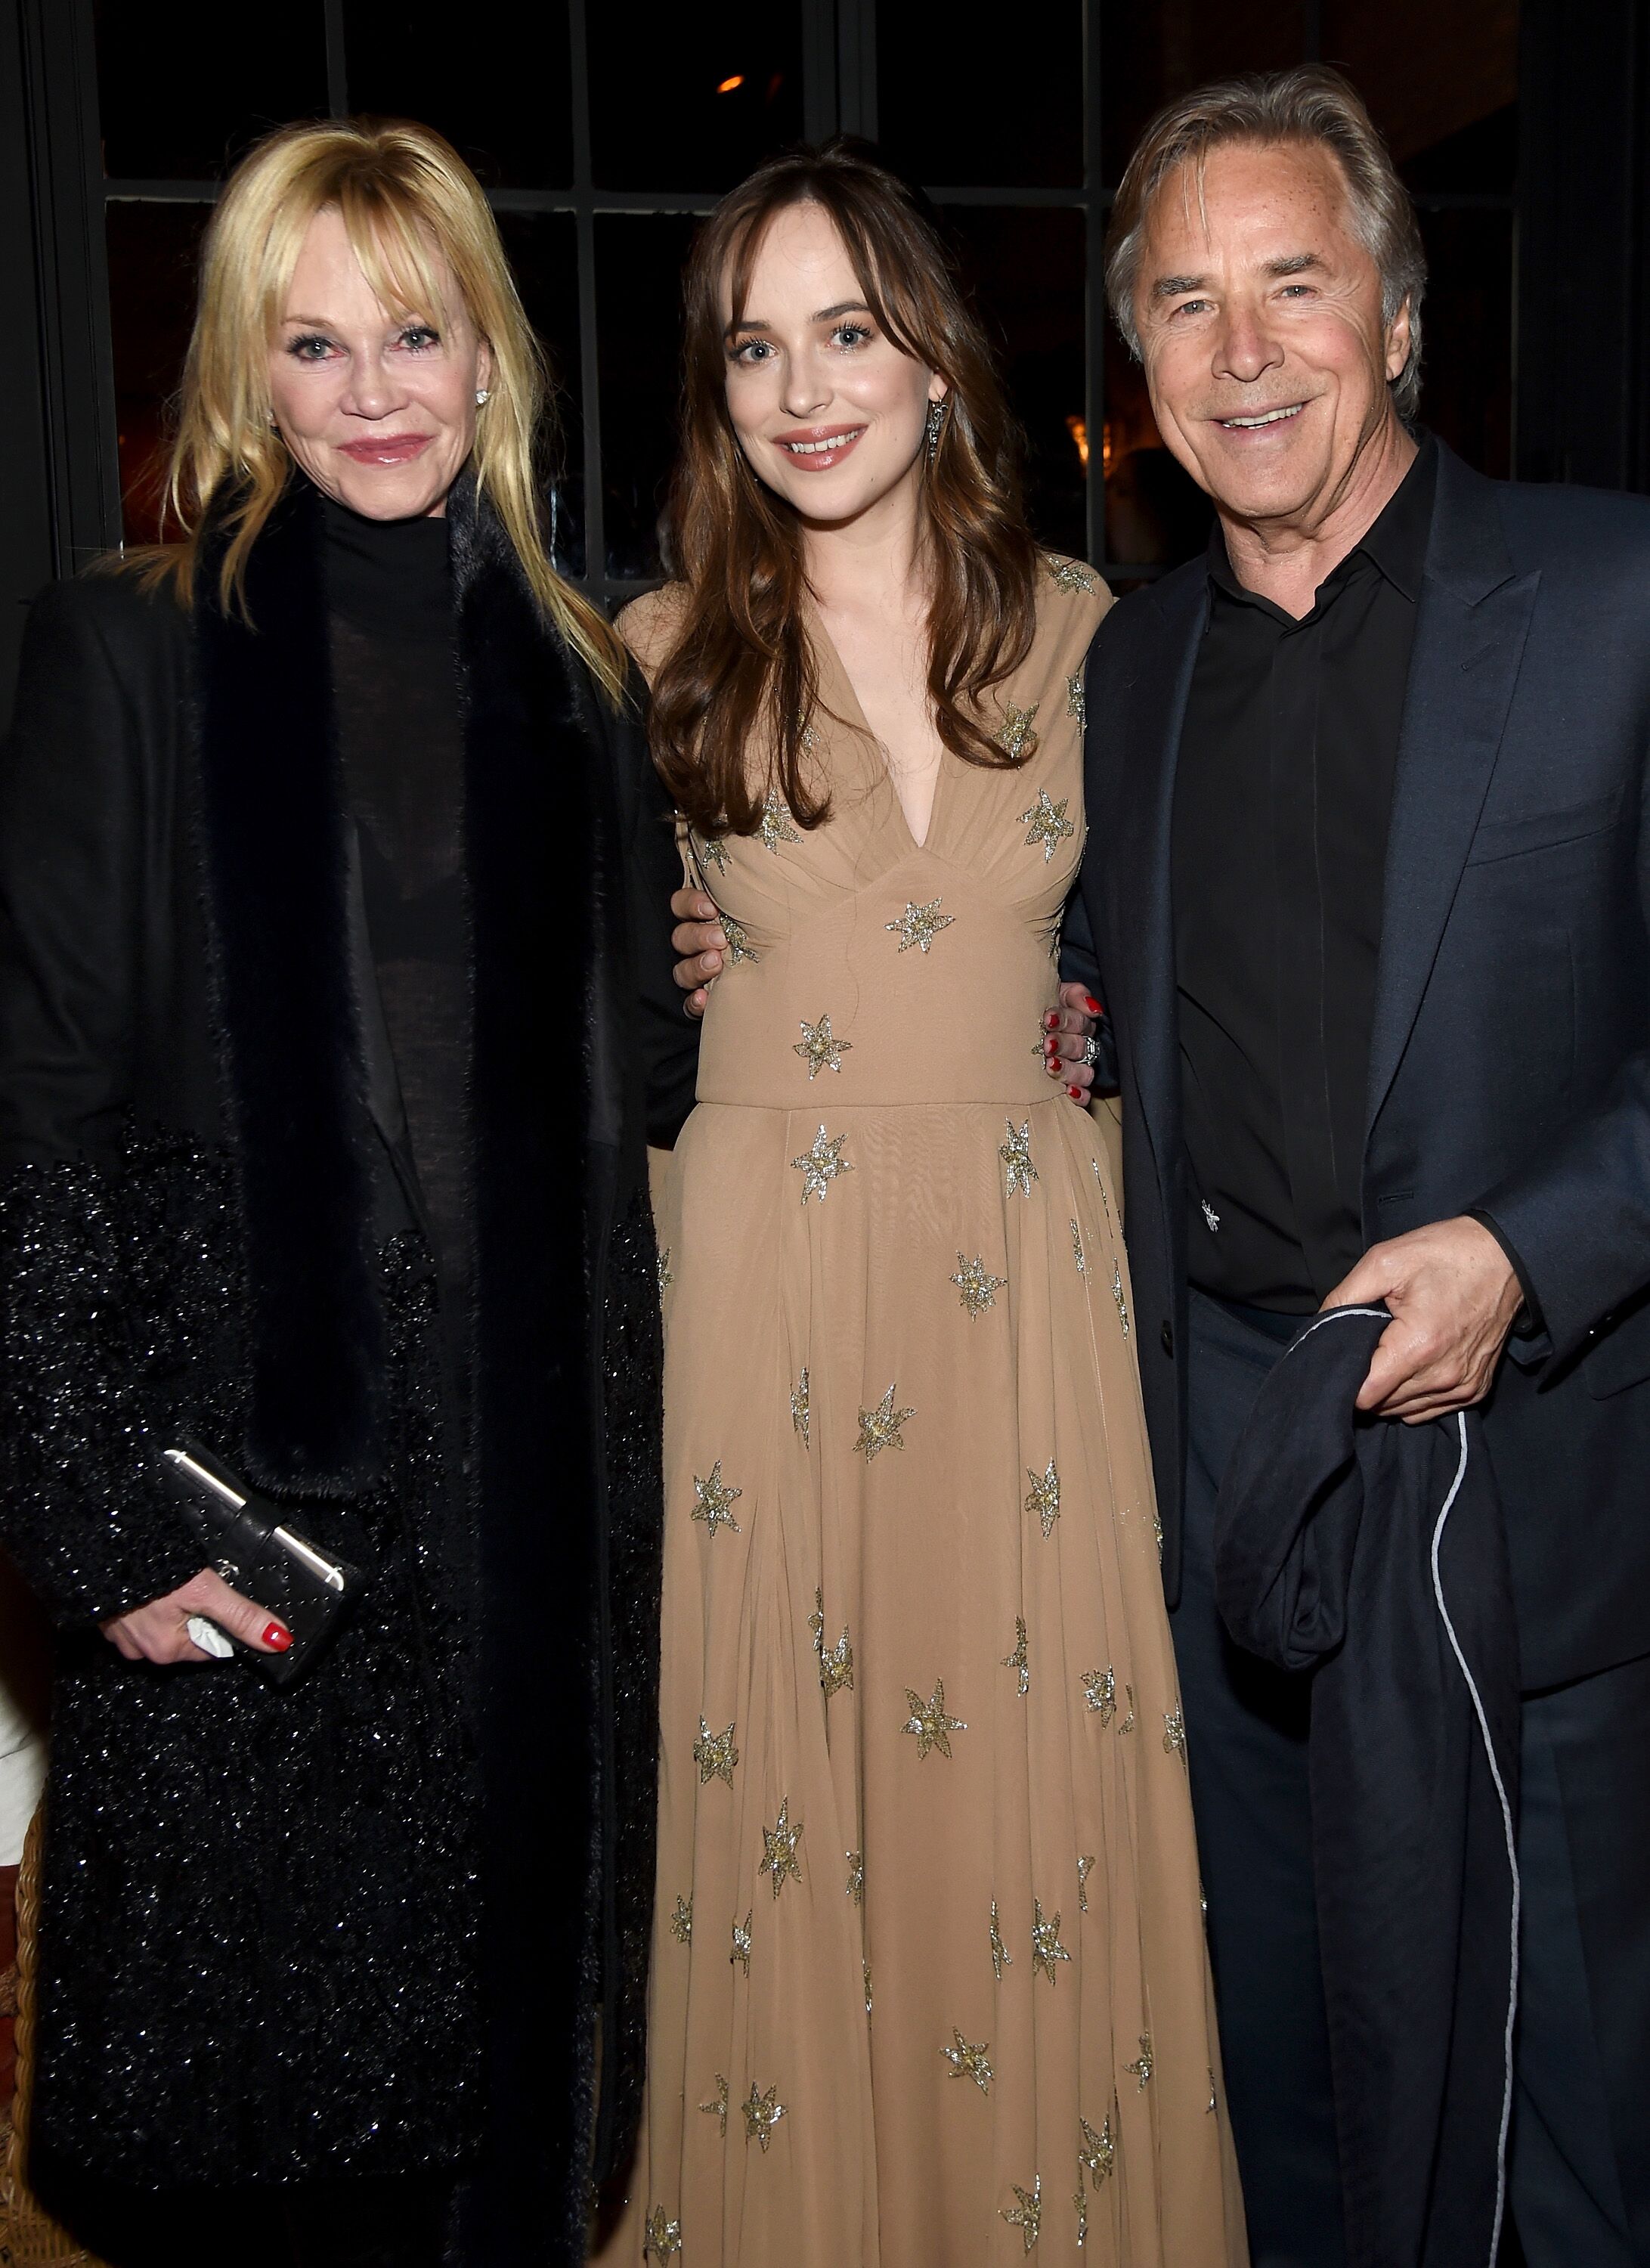 Melanie Griffith, Dakota Johnson, and Don Johnson attend the after party for the New York premiere of "How To Be Single." | Source: Getty Images